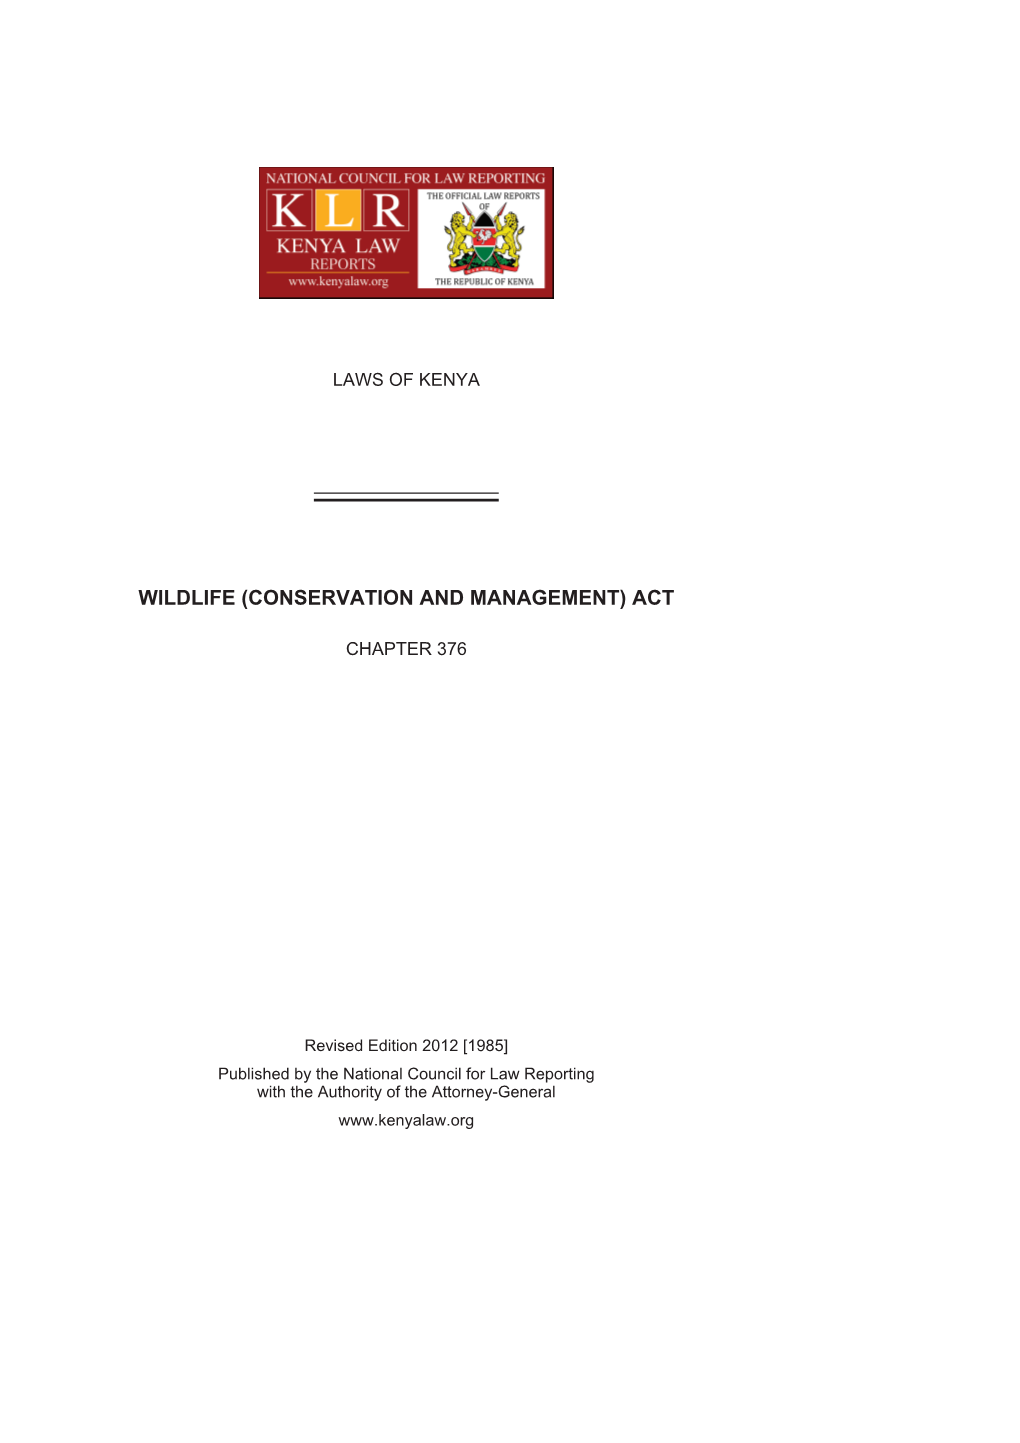 Wildlife (Conservation and Management) Act